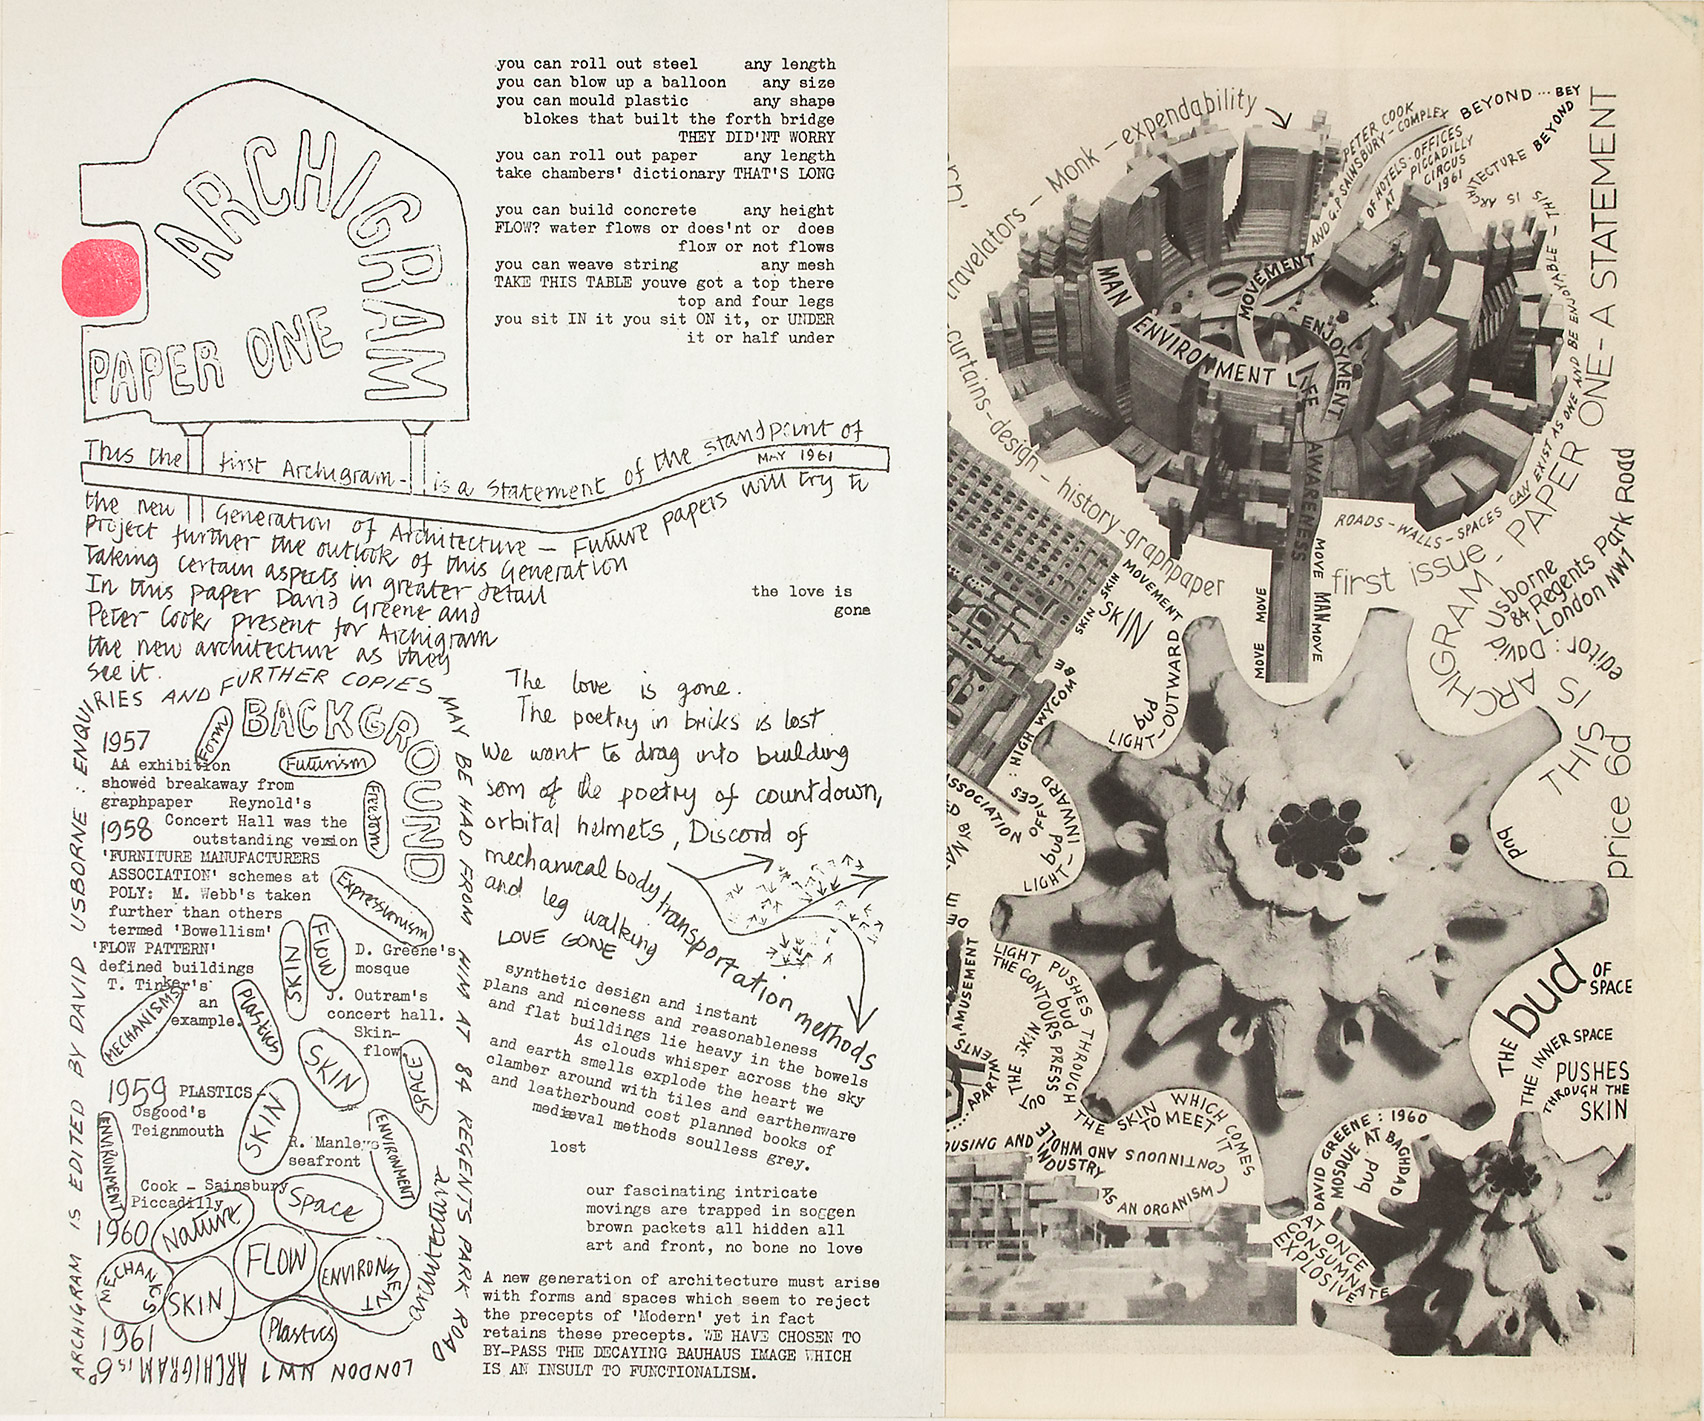 Issue one of the Archigram magazine was published in 1961